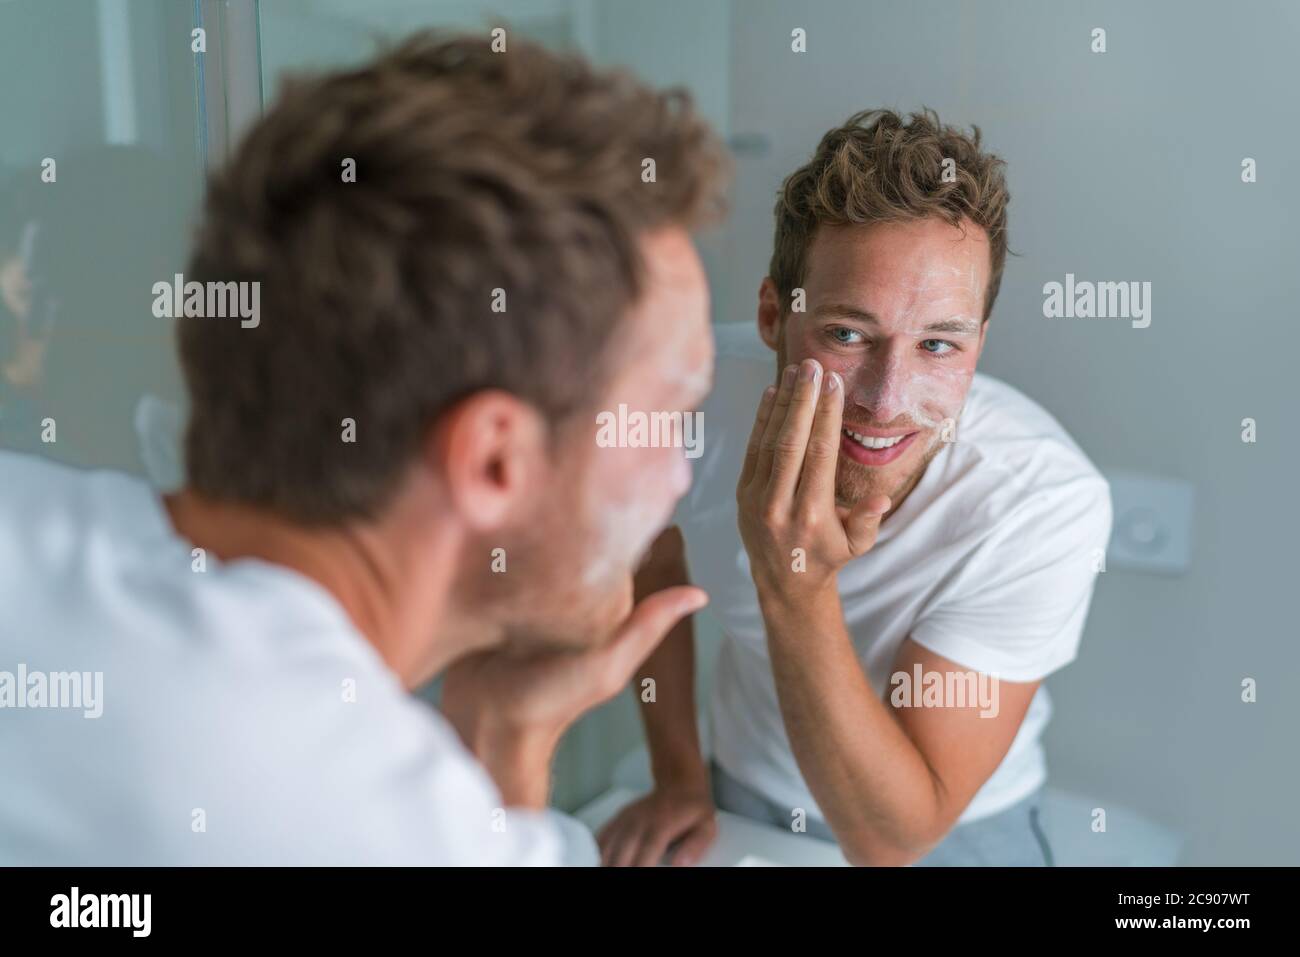 Man washing face with soap scrubbing exfoliation mask facial treatment looking in the mirror. Men taking care of skin, morning face wash routine for Stock Photo